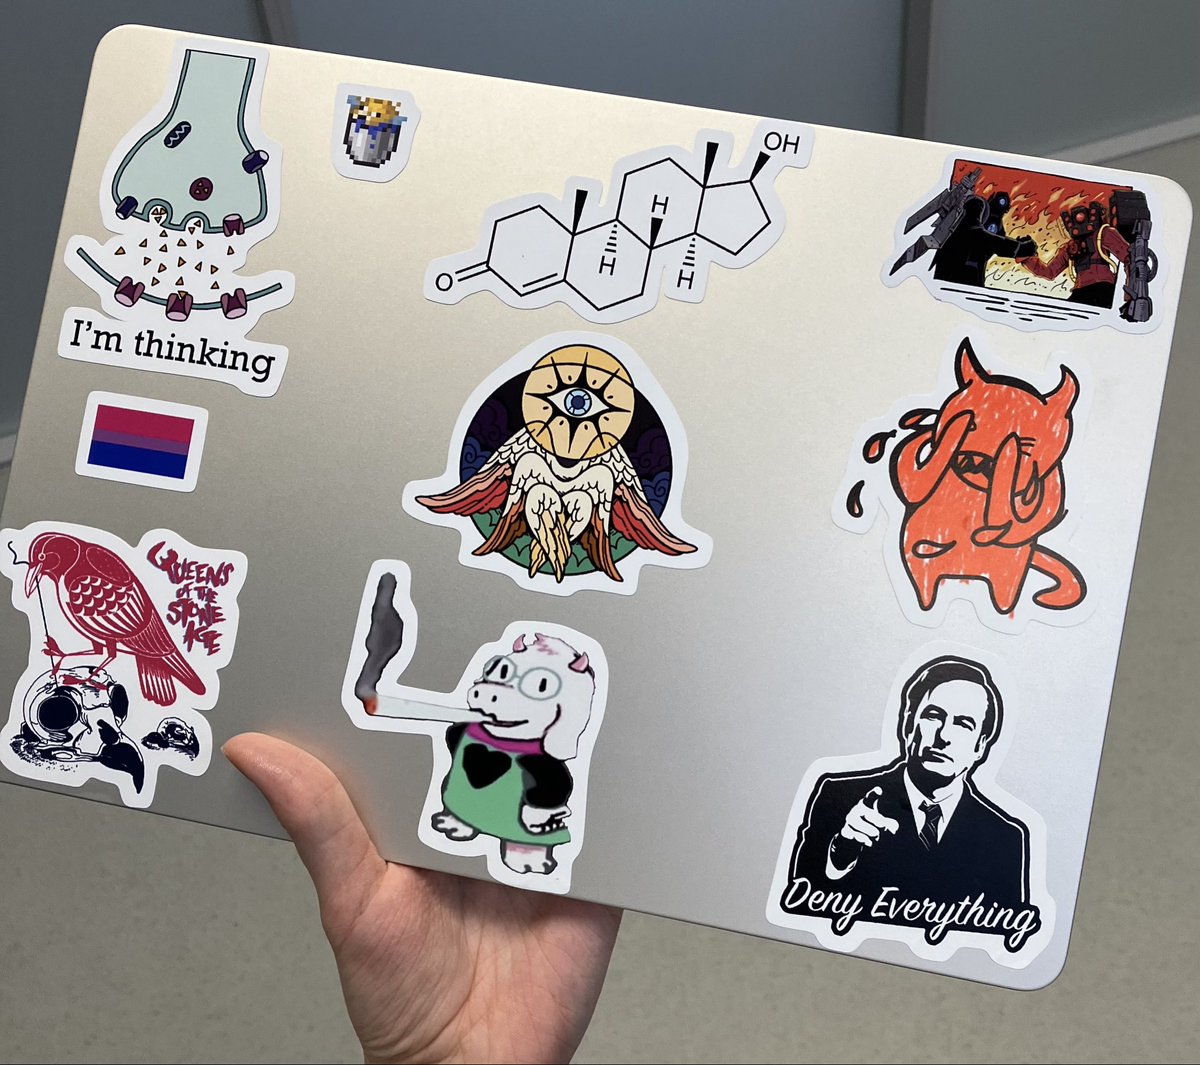 ok maybe this is not ideal for a work laptop (middle sicker design by @ultra_infinite)